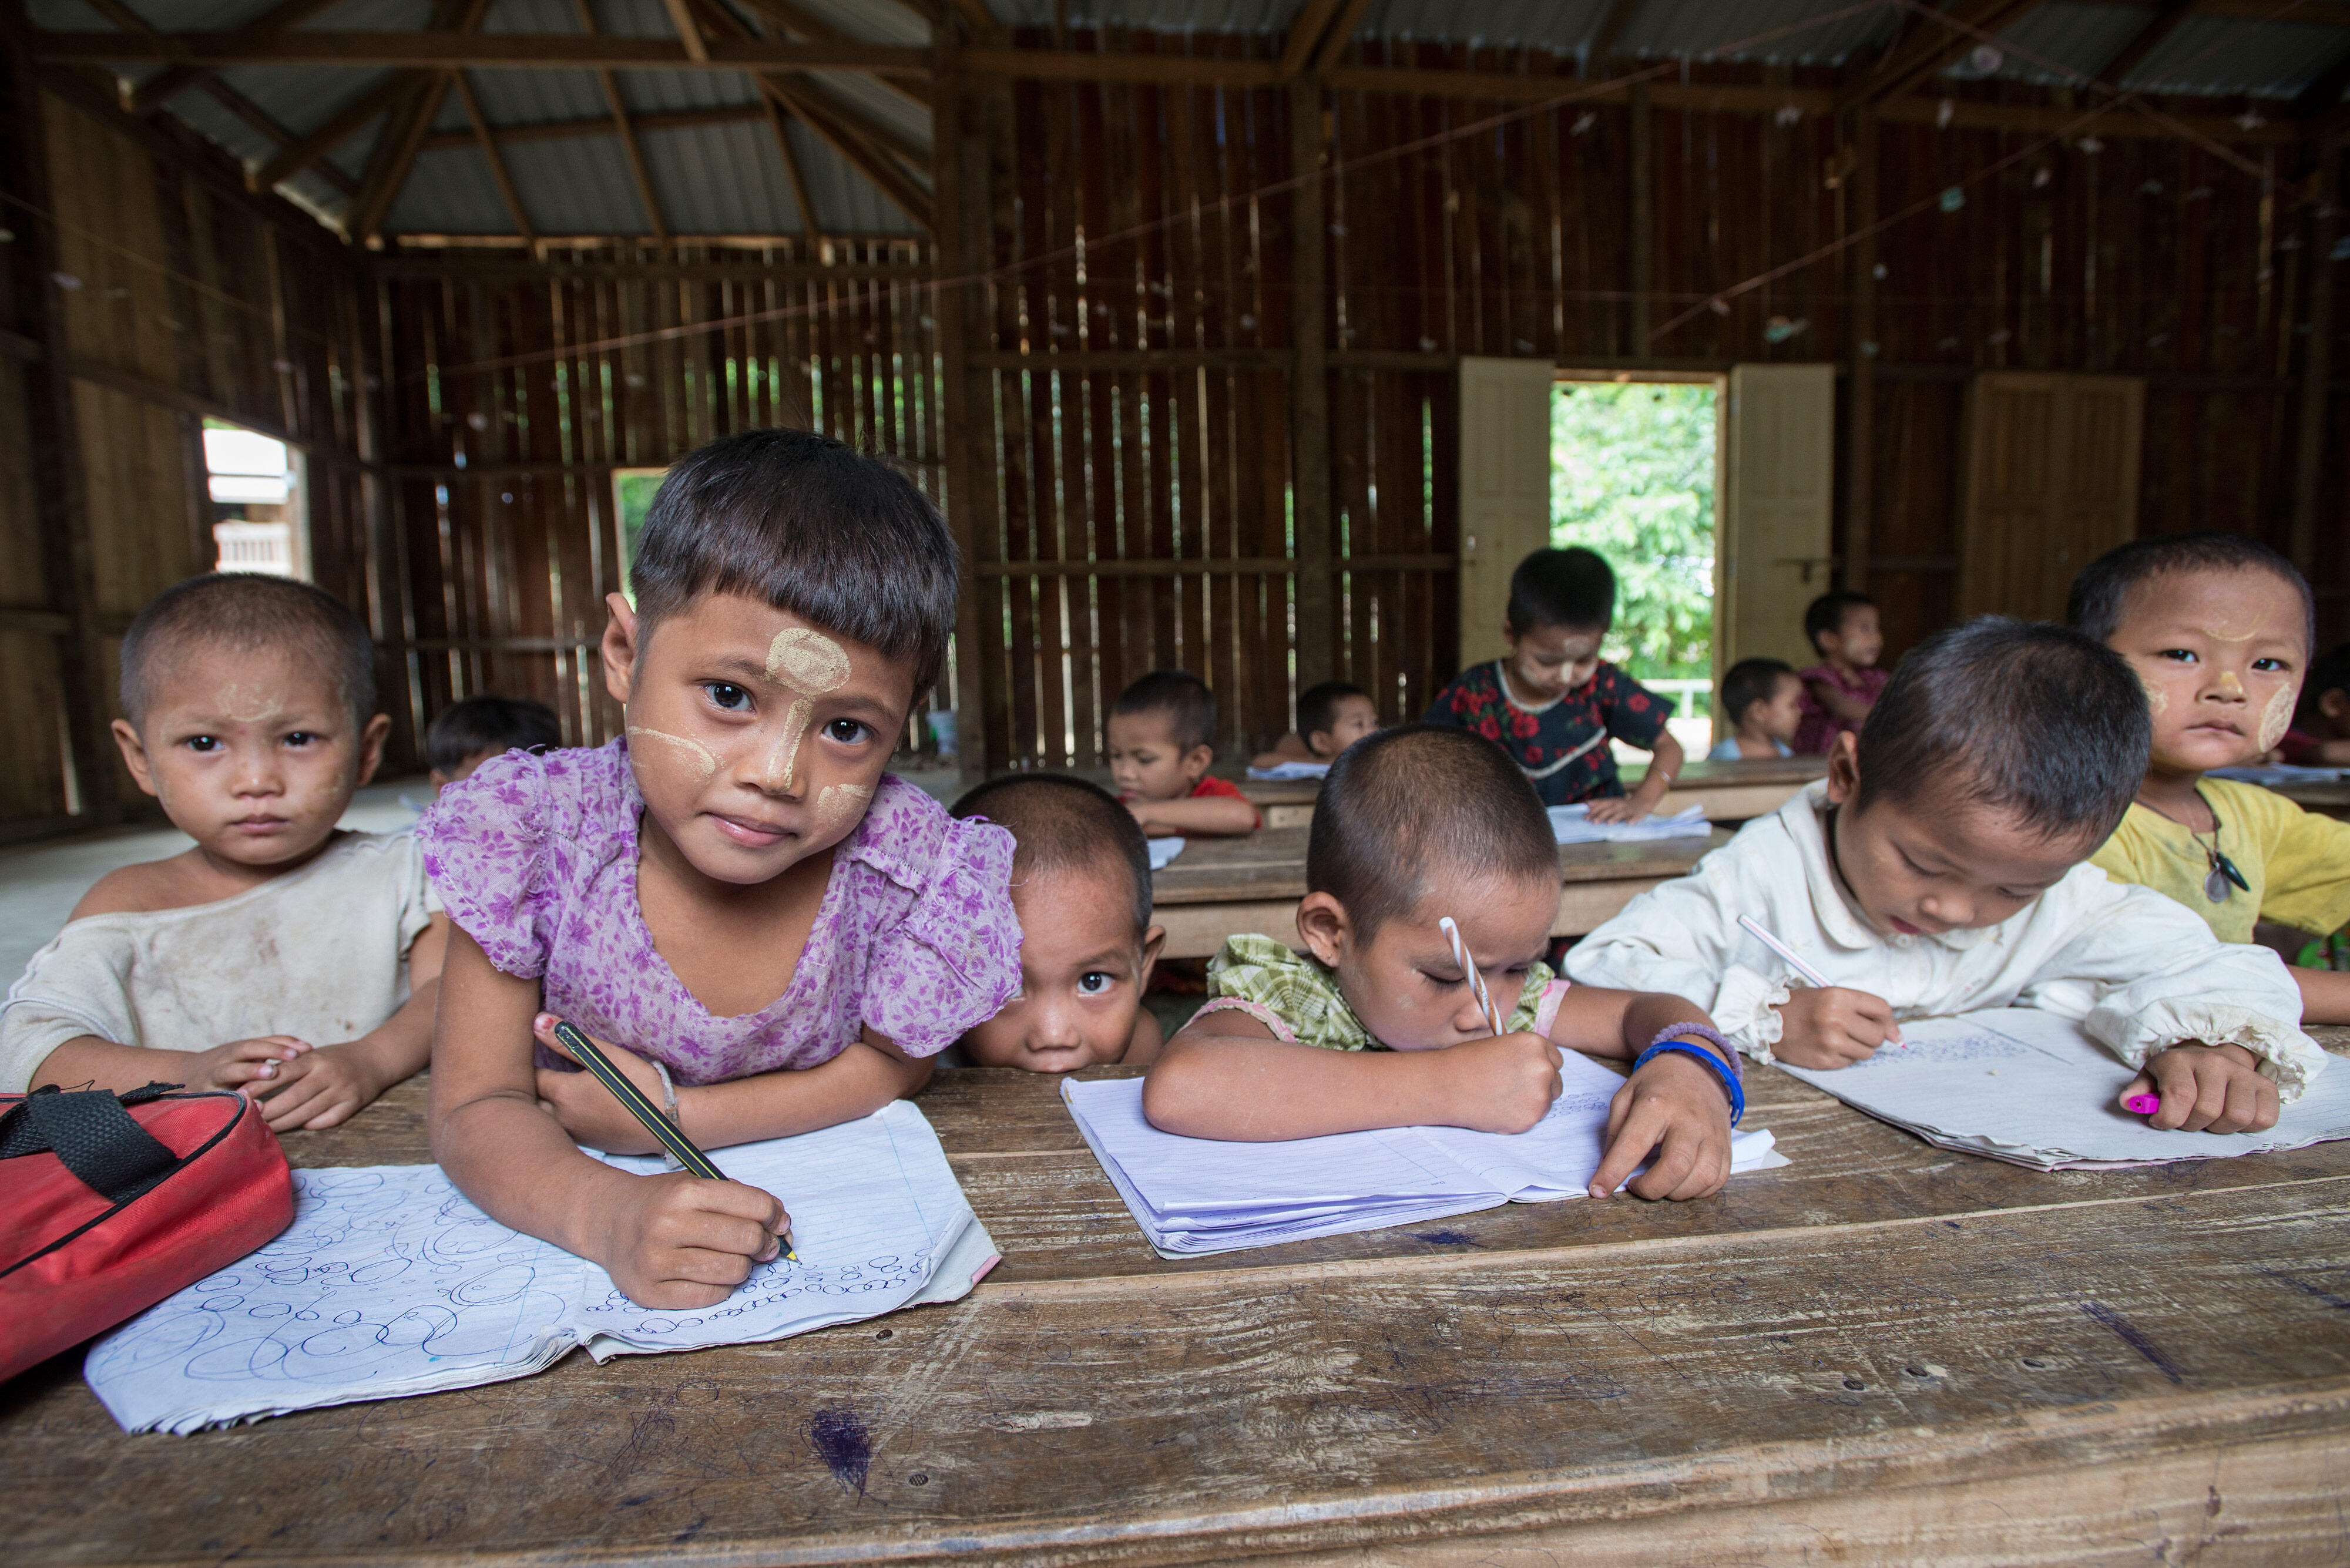 Refugee children hold pencils in a classroom at a refugee camp in northern Thailand